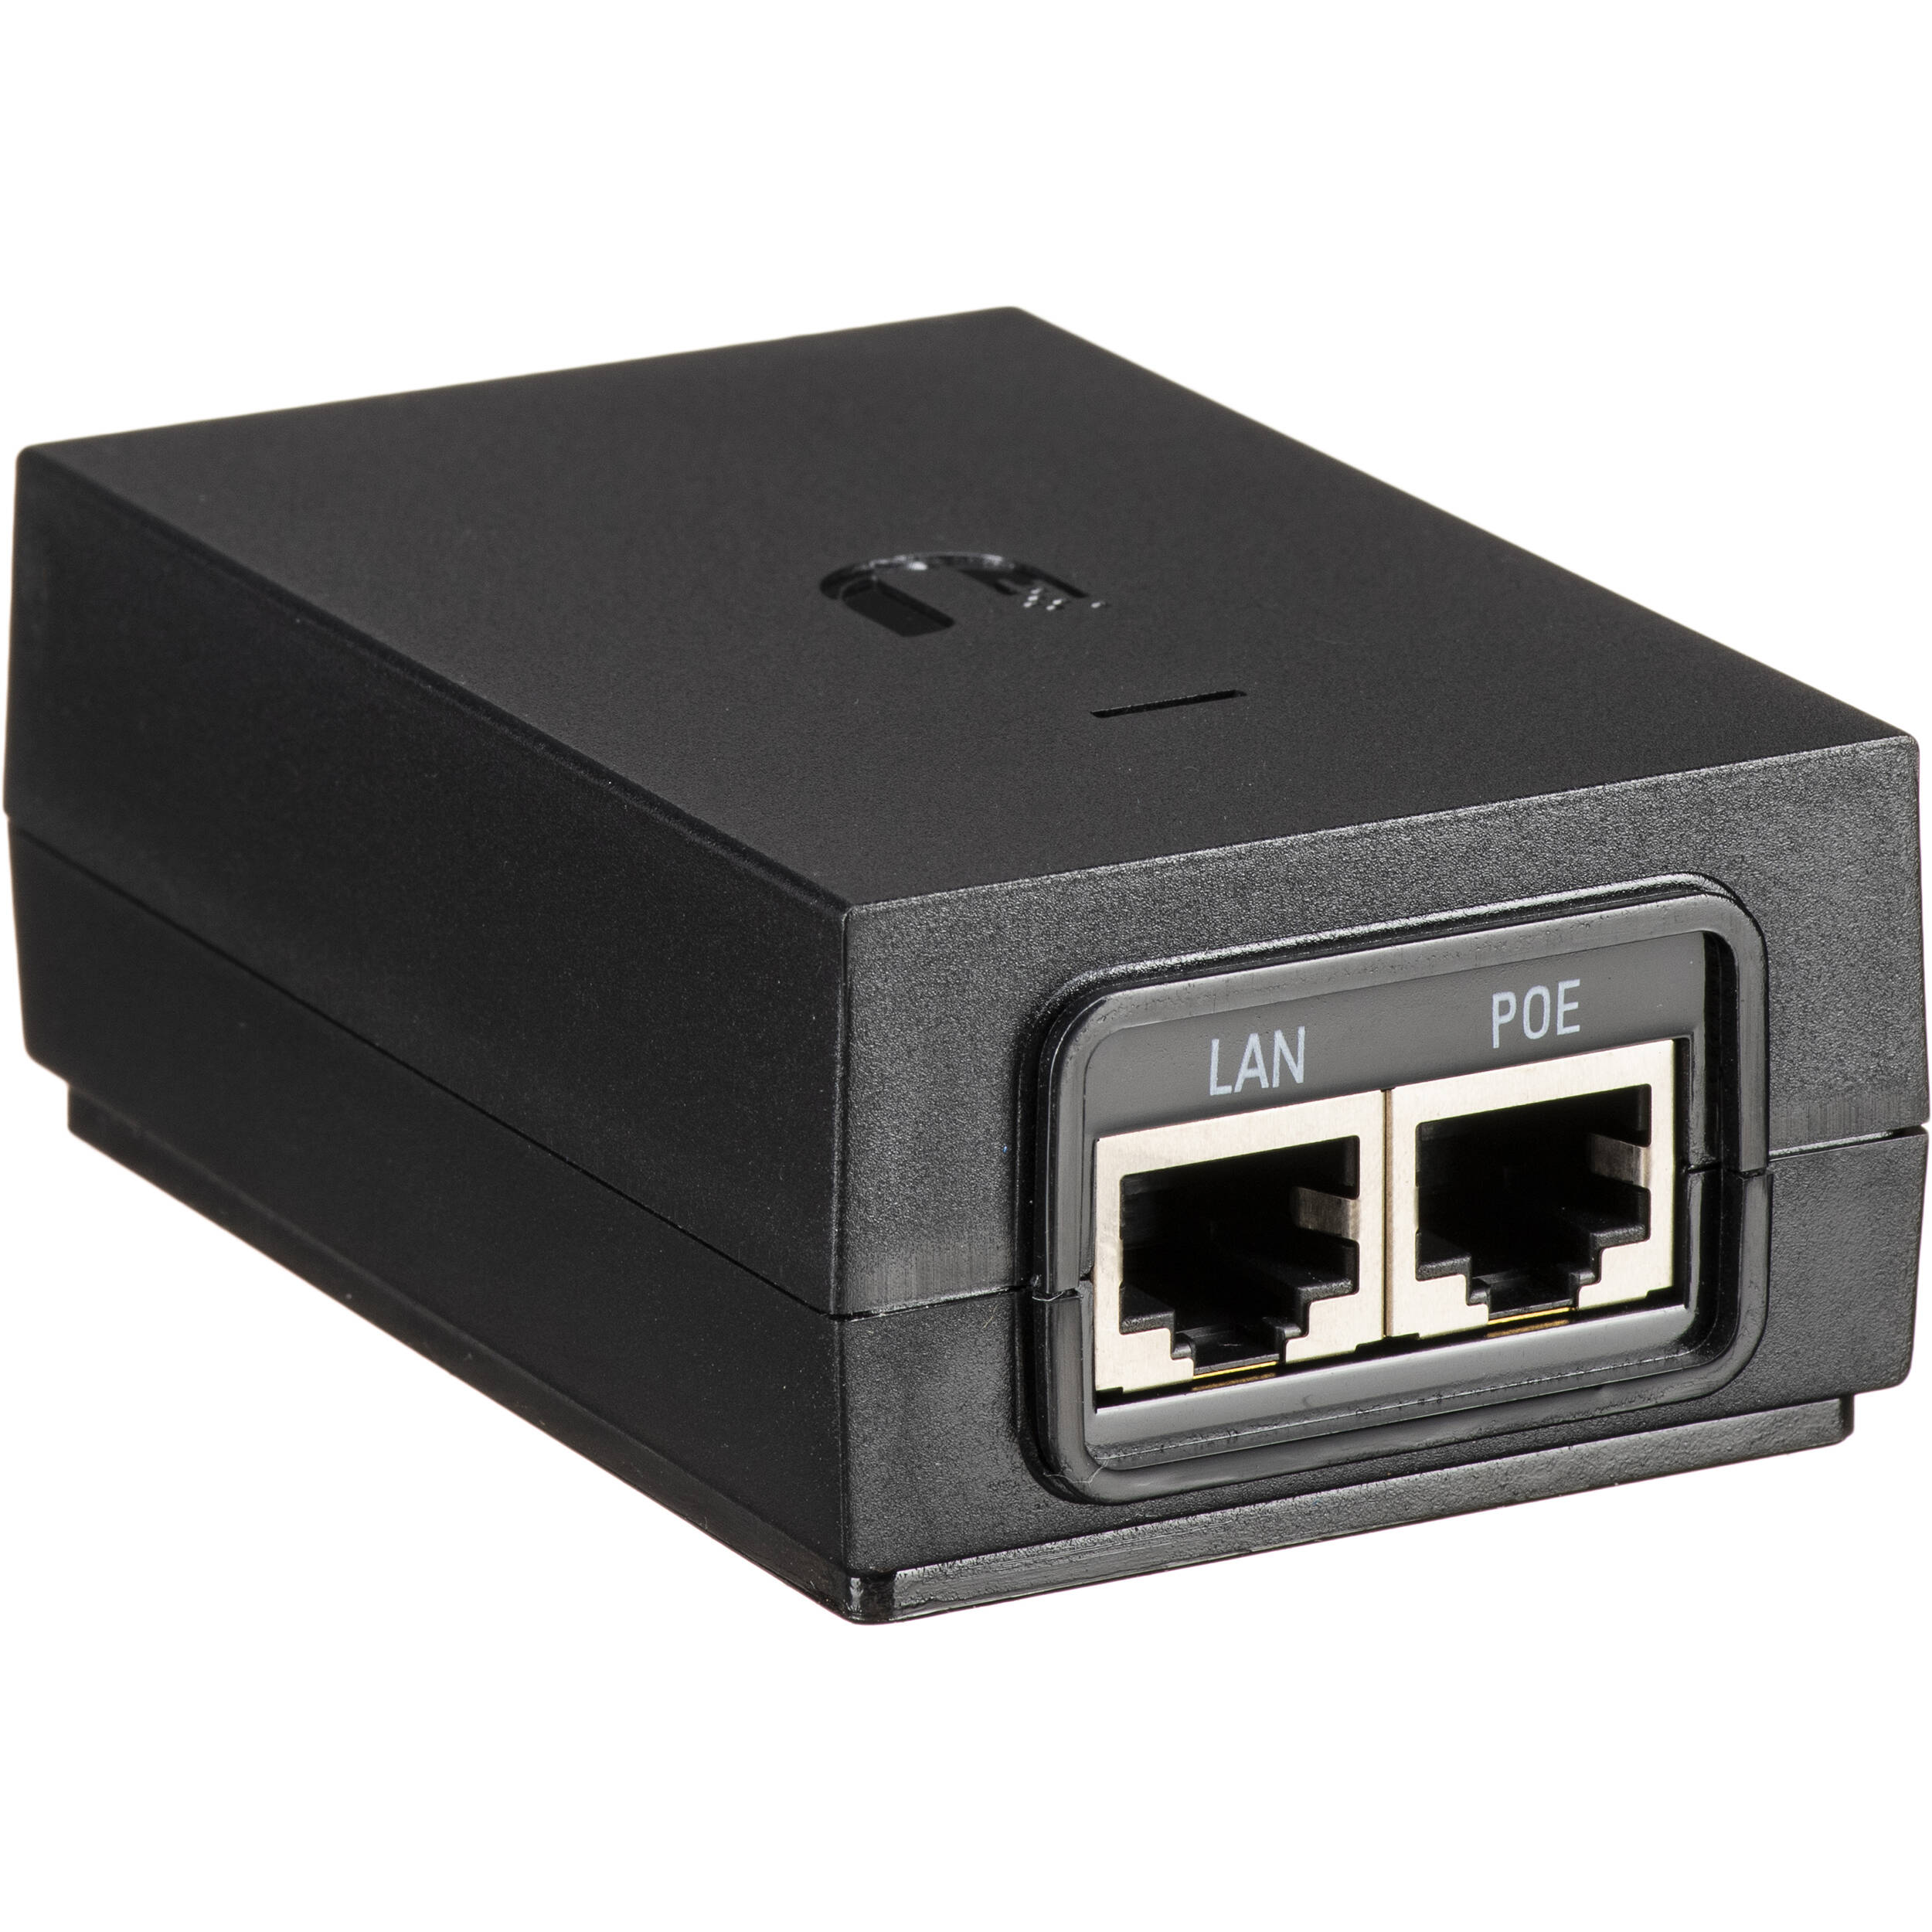 https://lansotechsolutions.co.ke/wp-content/uploads/2022/11/ubiquiti_networks_poe_48_24w_g_48v_poe_adapter_with_1079130.jpeg